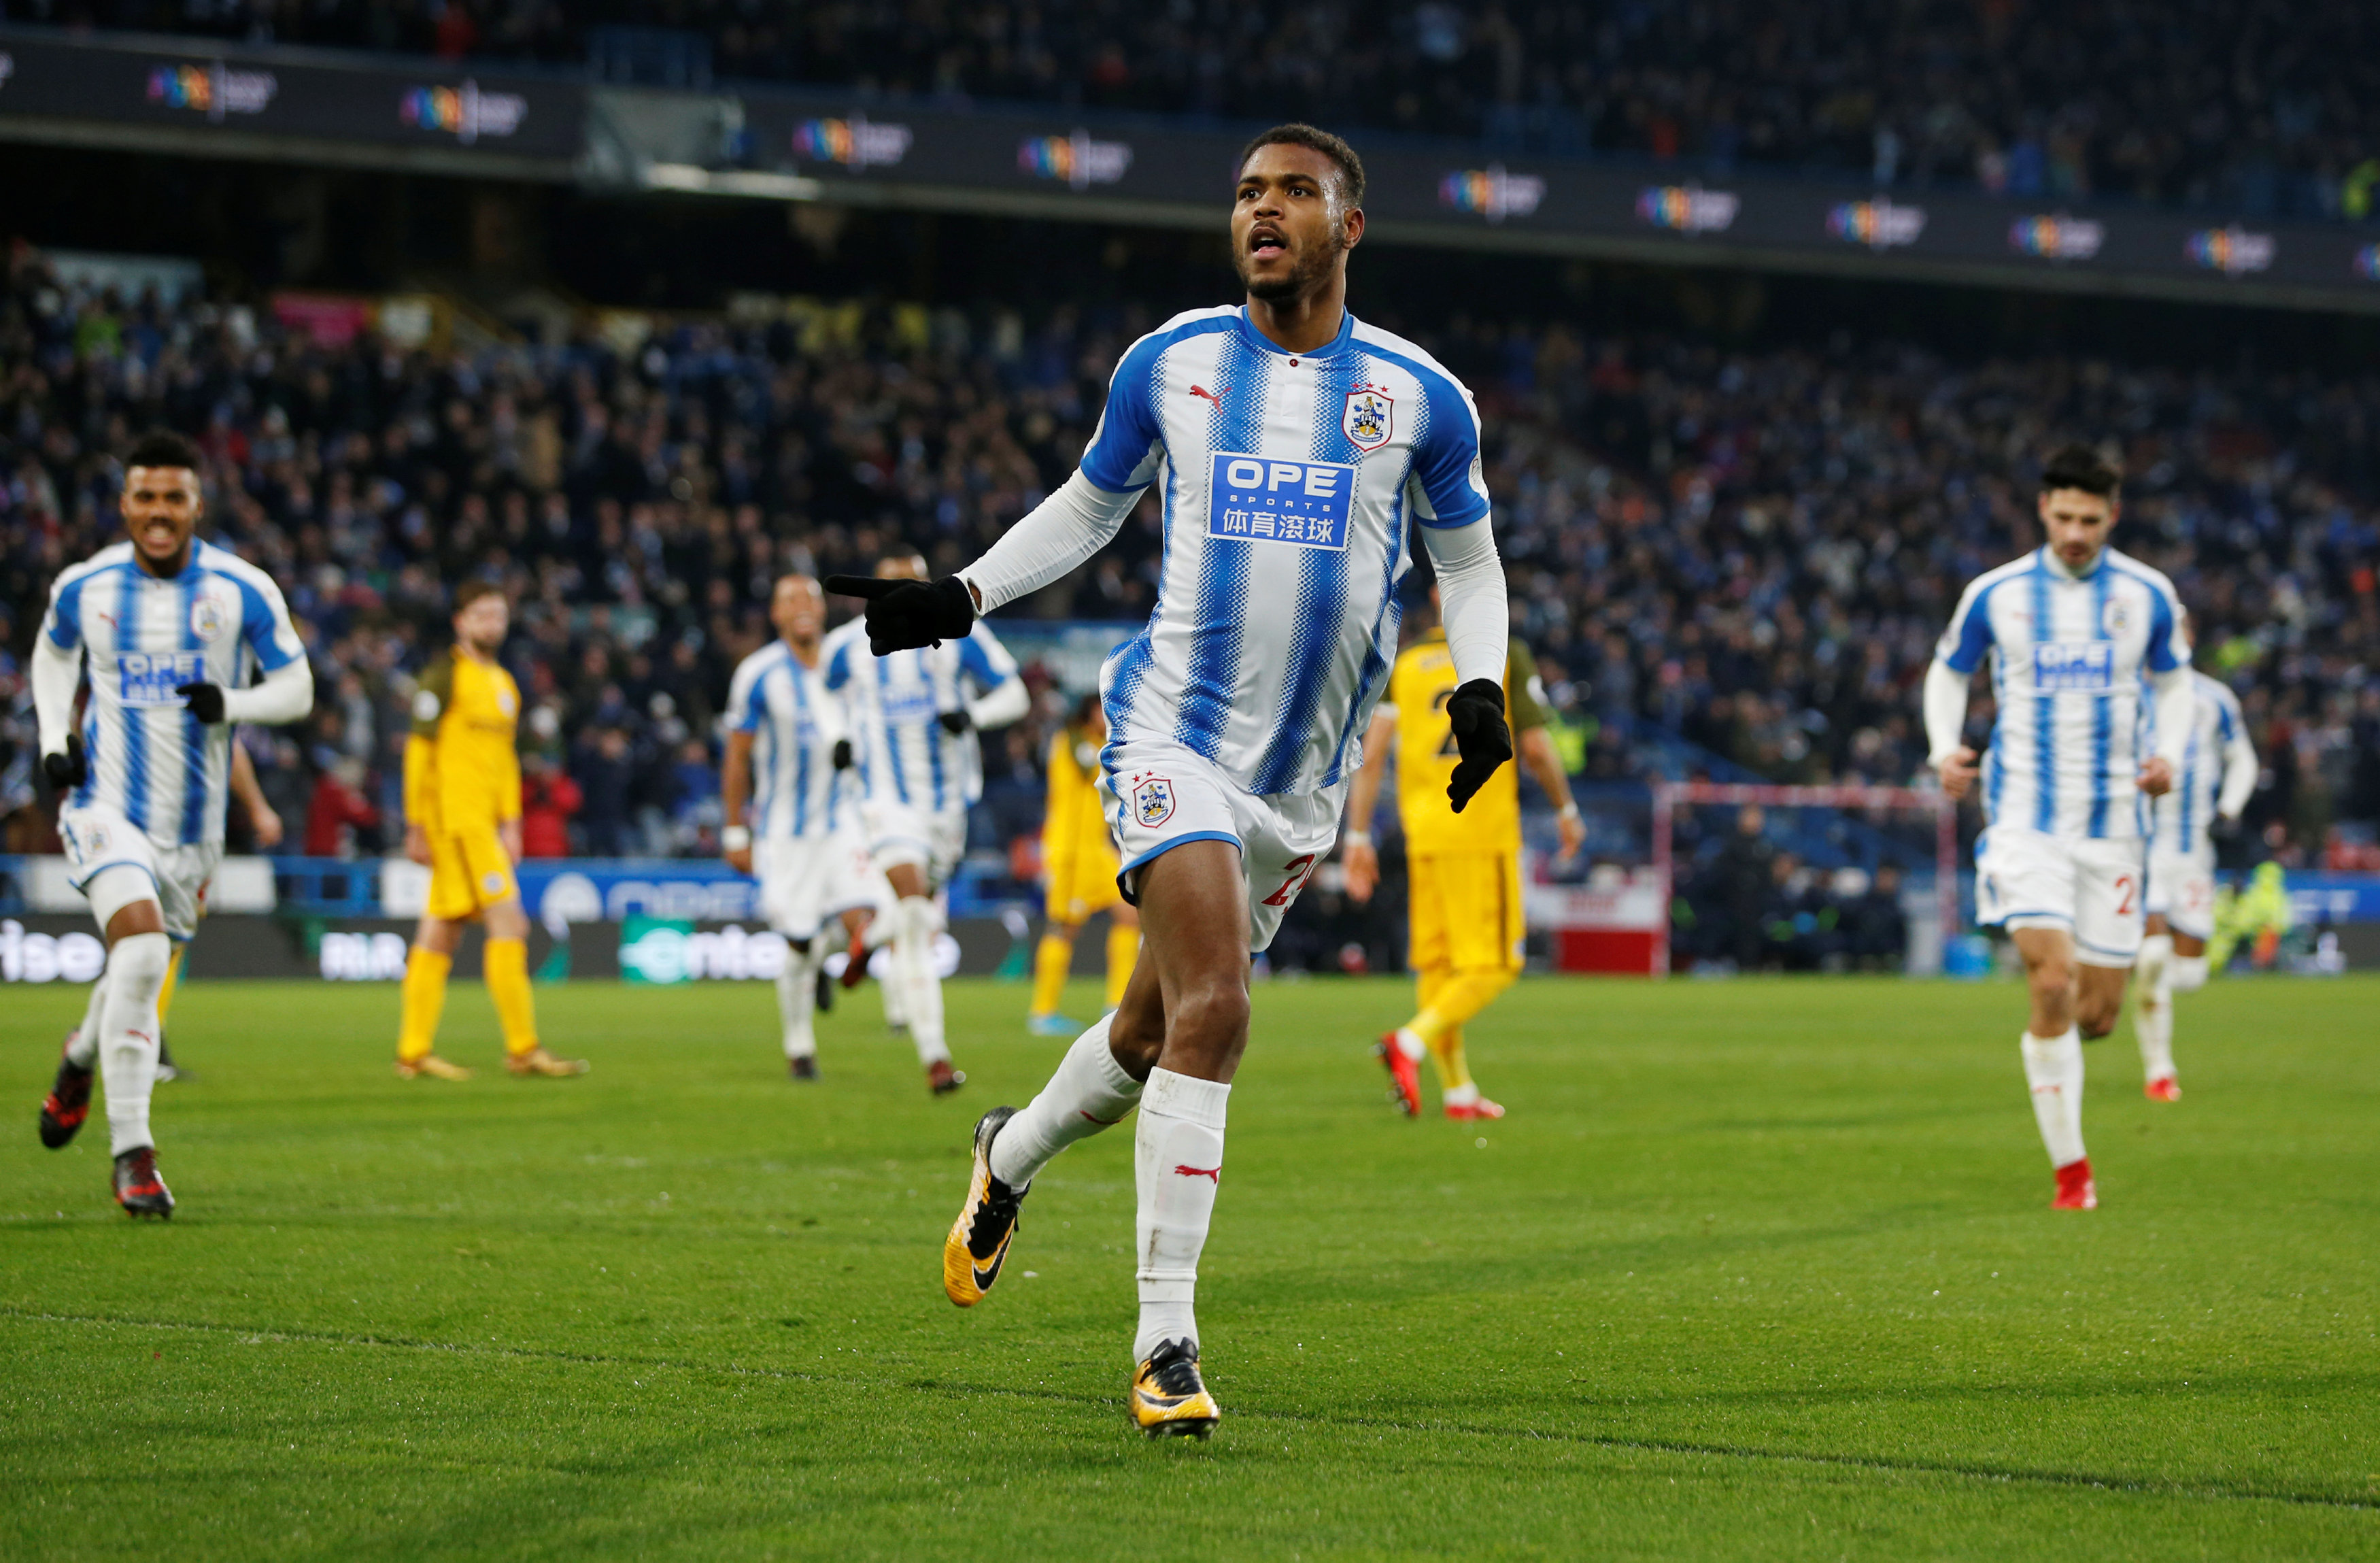 Football: Mounie double lifts Huddersfield against Brighton